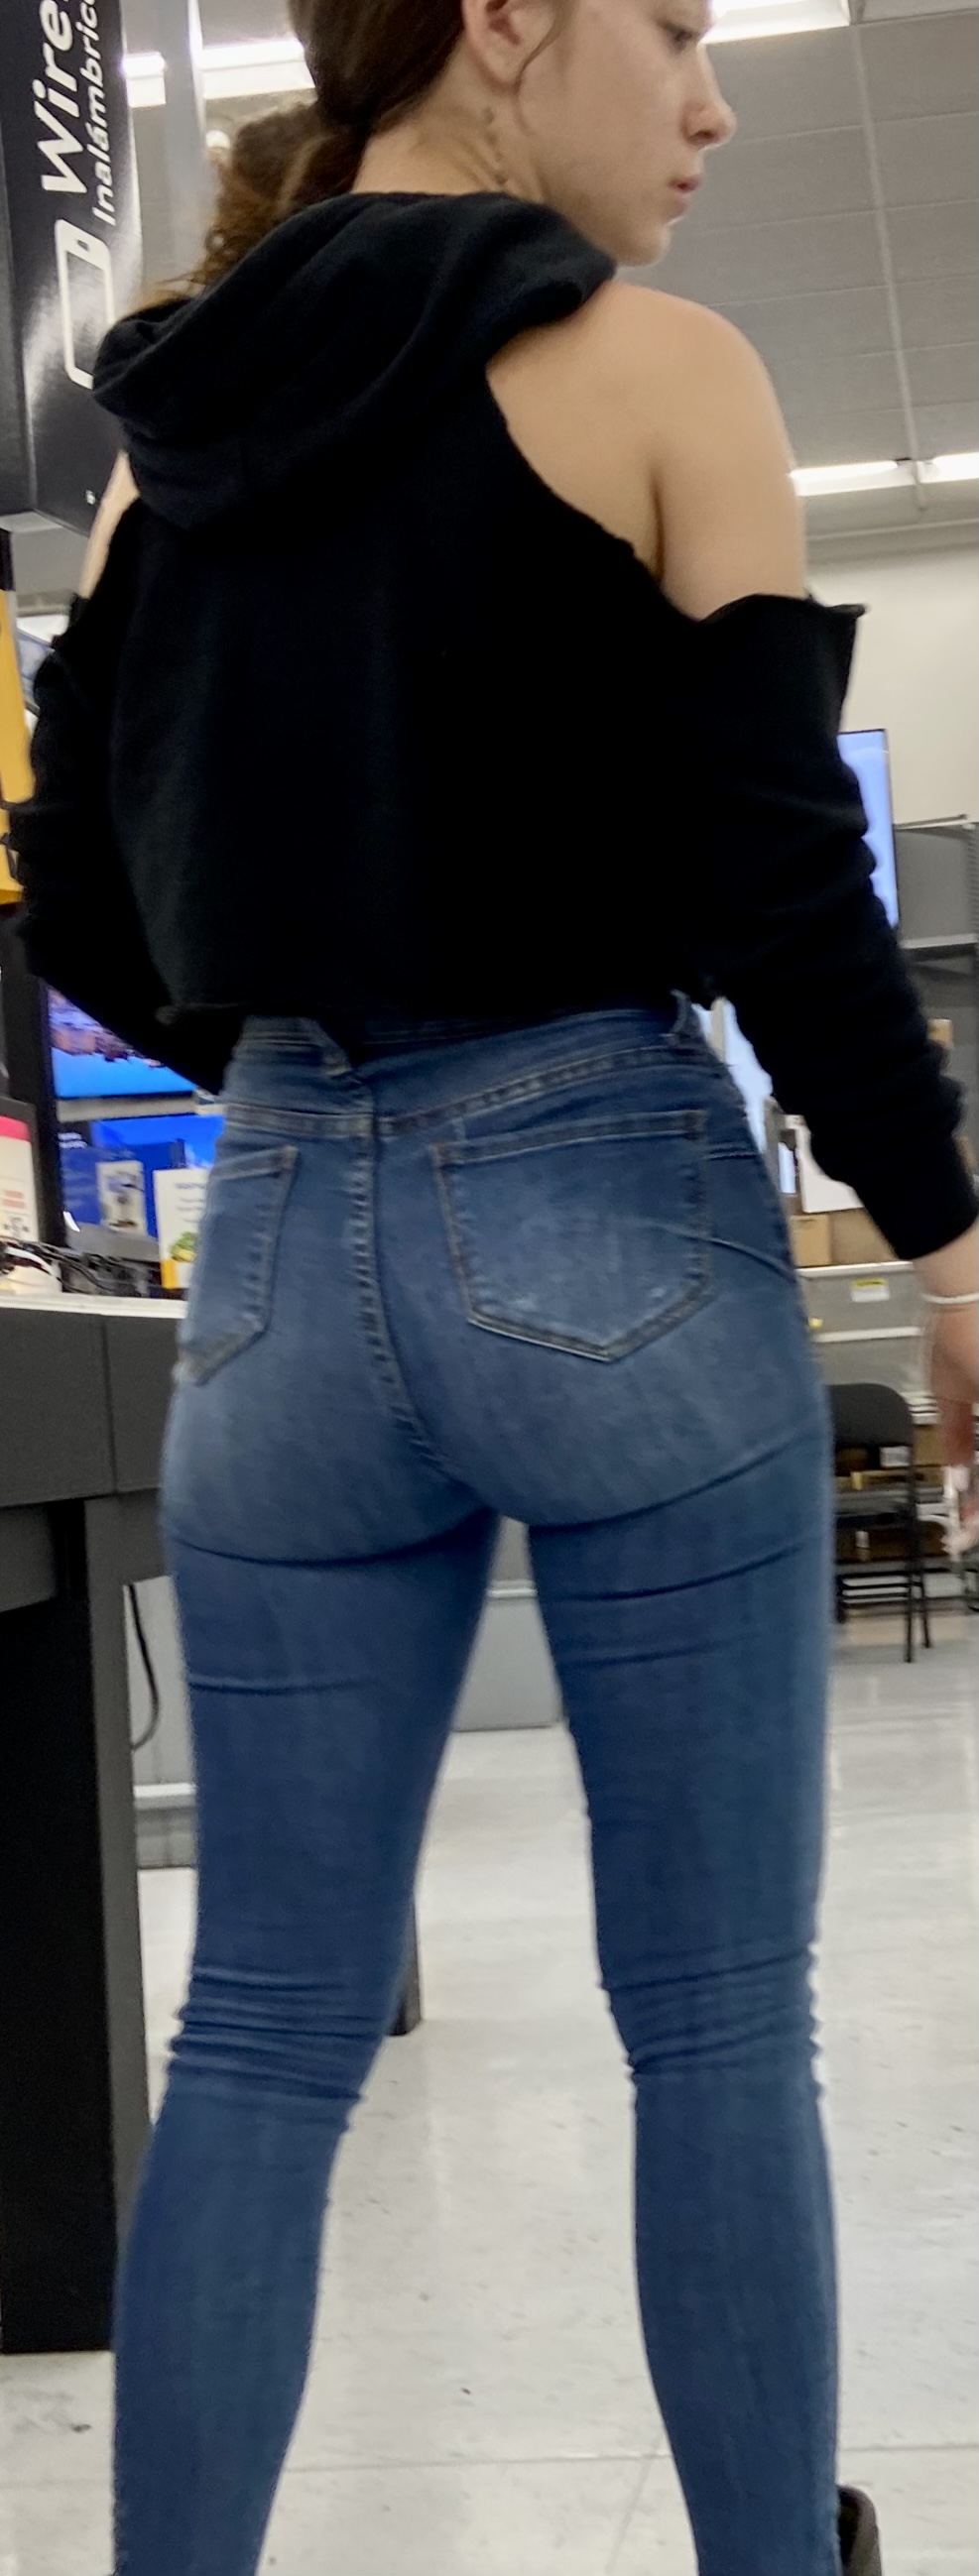 Tightest ass ever - Tight Jeans - Forum